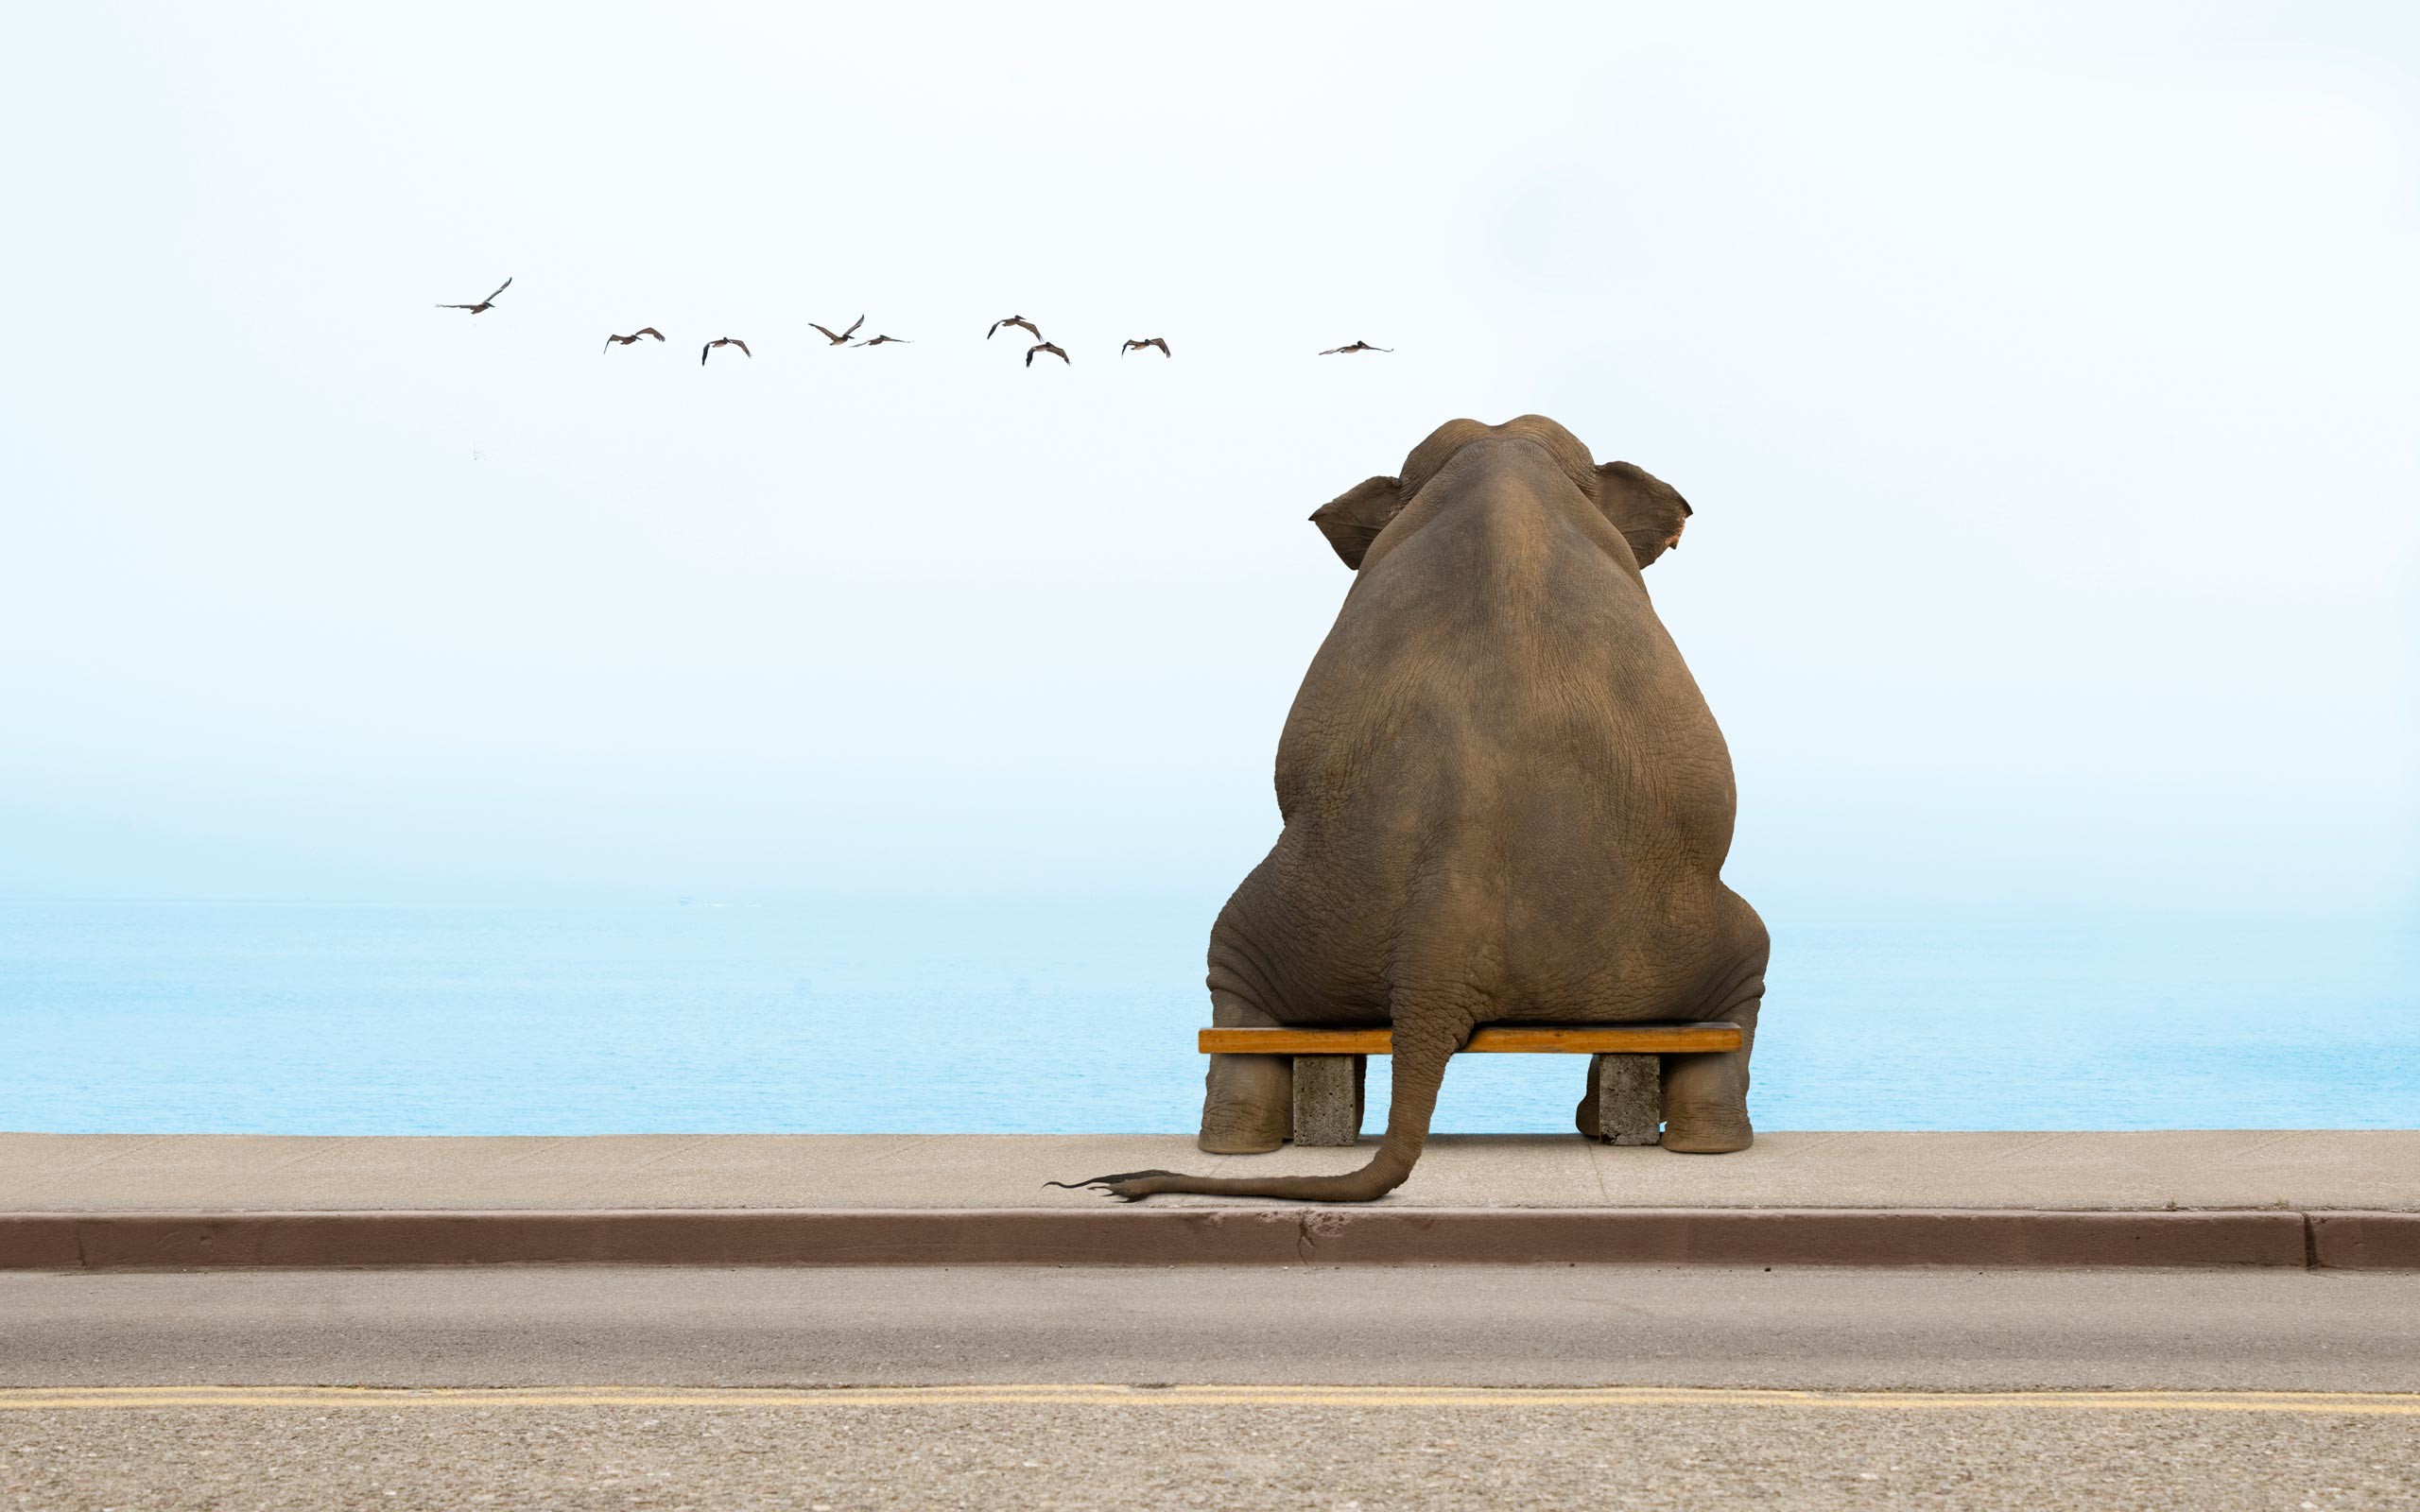 2560x1600 wallpaper.wiki-Elephant-Funny-Sitting-On-Bench-Wallpapers-